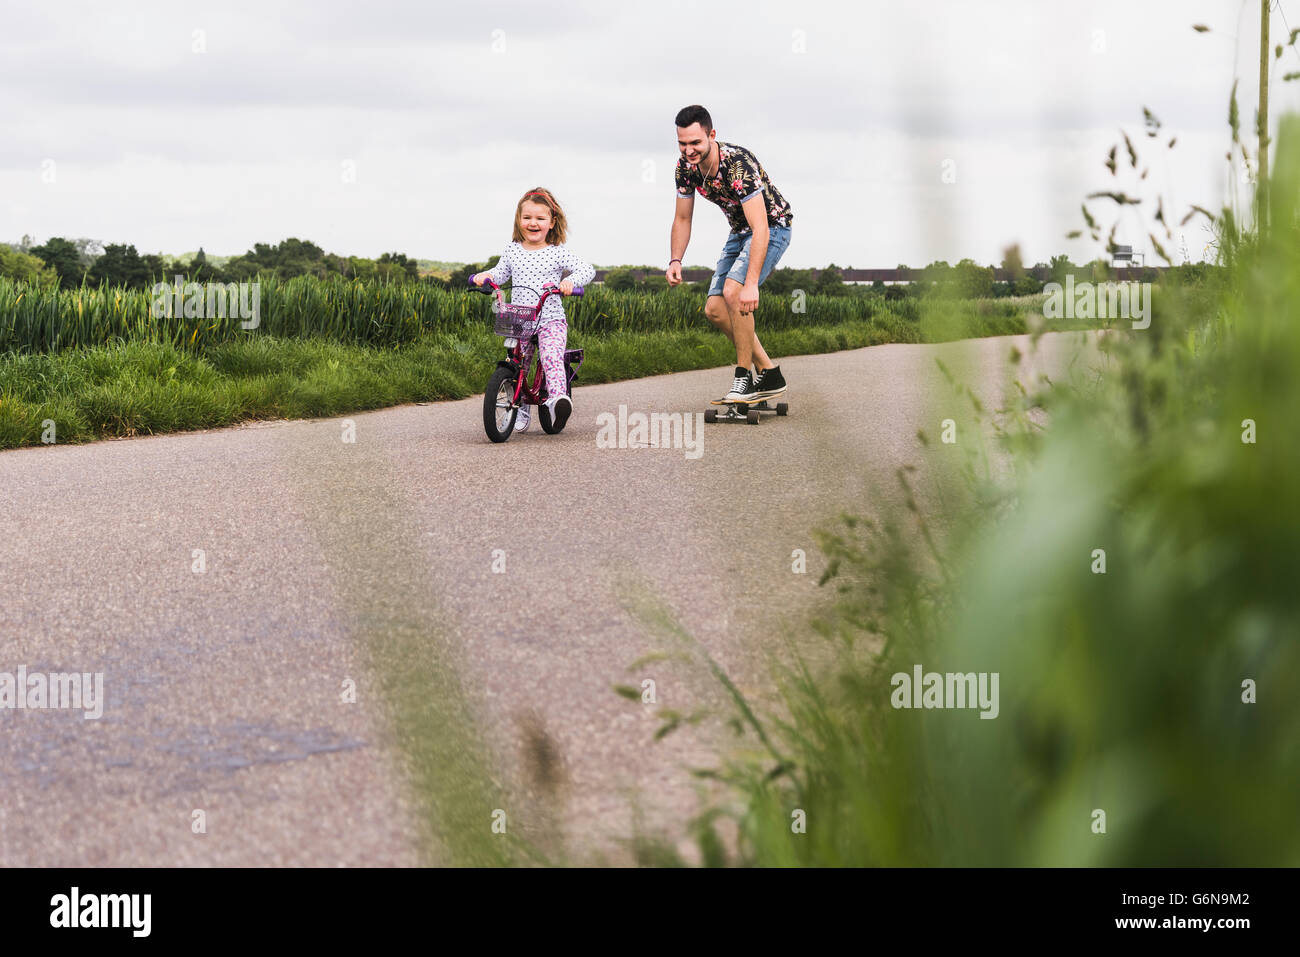 Father on skateboard accompanying daughter on bicycle Stock Photo